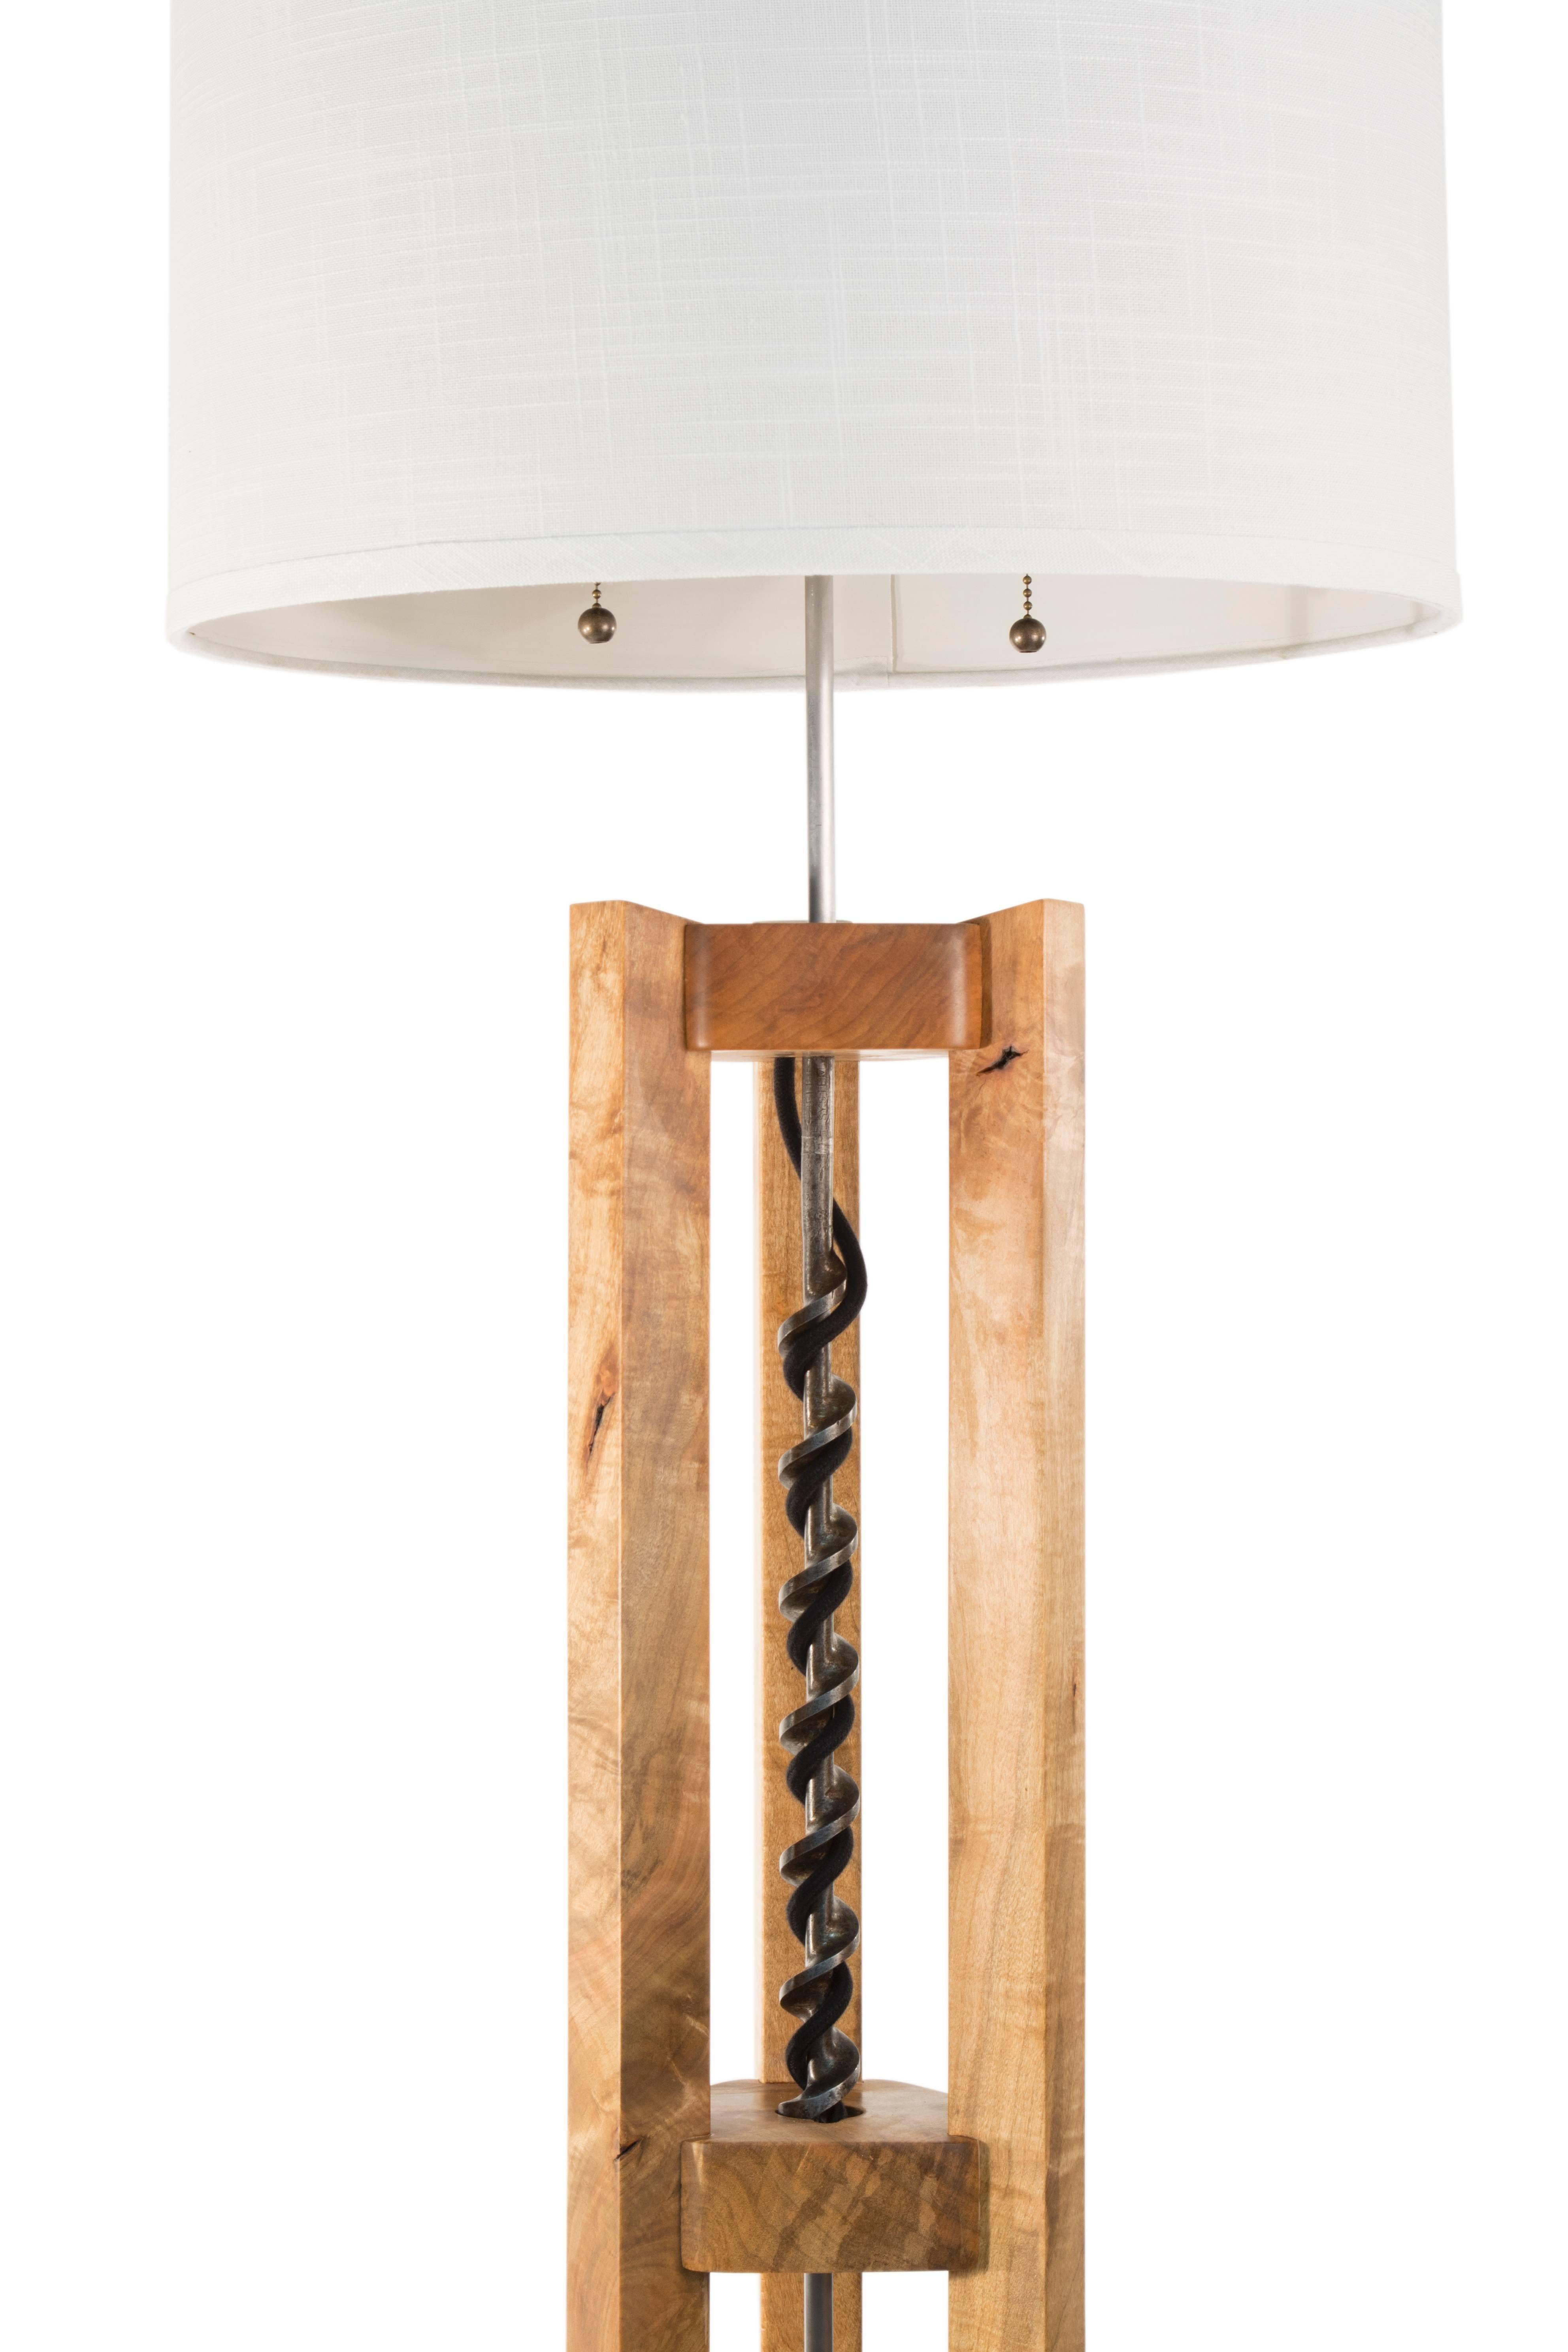 - Juniper Maple - antique drill bit - custom steel hardware 
- two socket pull cord fixture - linen drum shade - cloth wrapped cord.

Measures: 19 x 19 x 70 inches (I x W x H).

Wired for 120 v outlets unless 220 v is requested, everything is